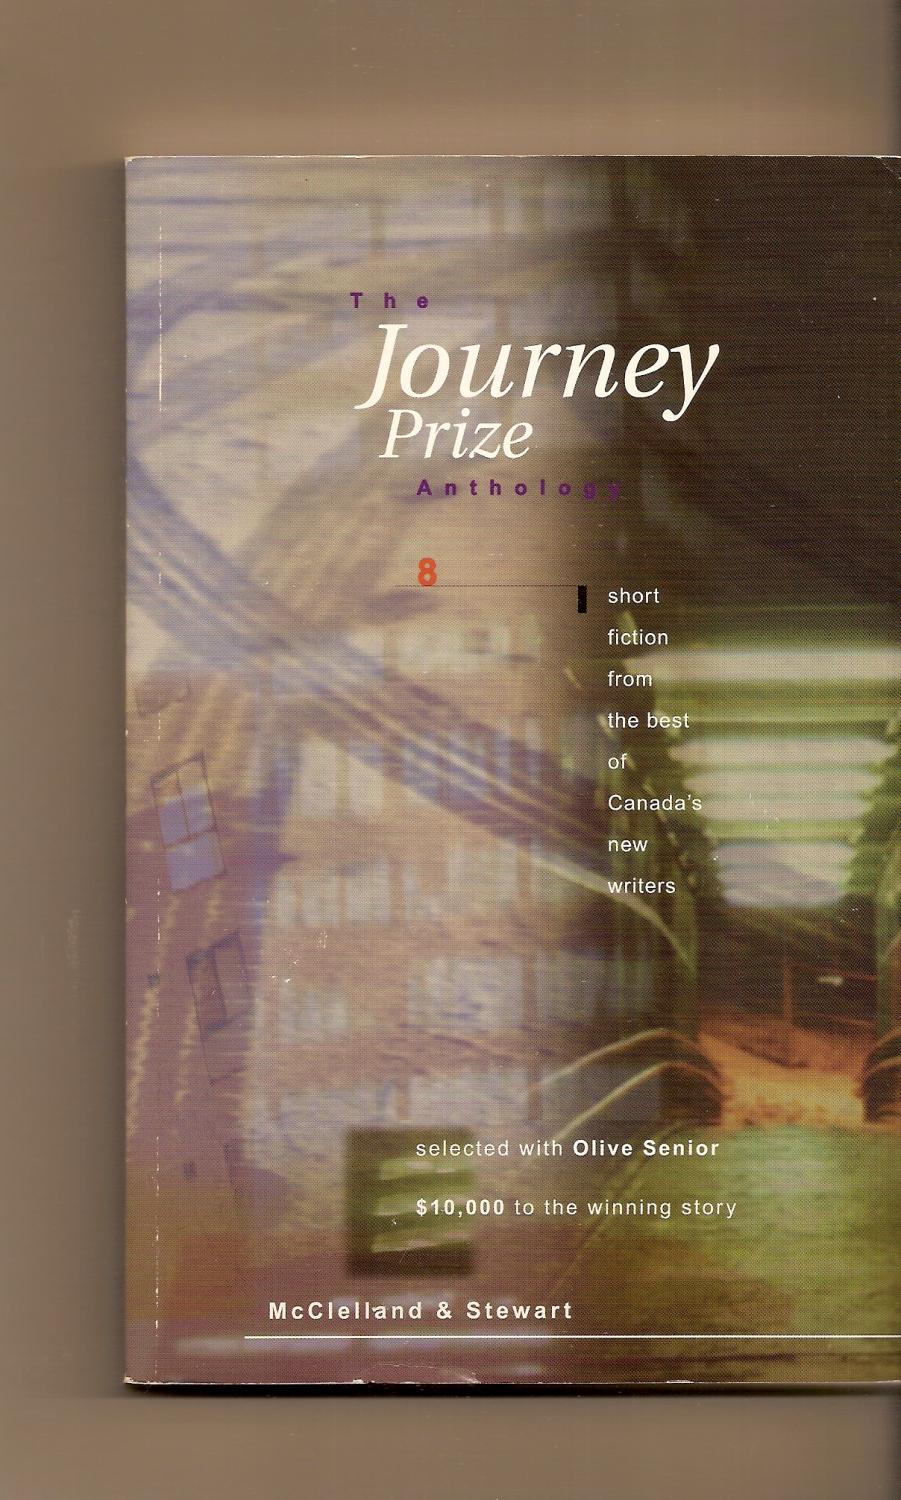 Journey Prize Anthology, The 8 --Short Fiction from the Best of Canada's New Writers. - Senior Olive, Compilie by